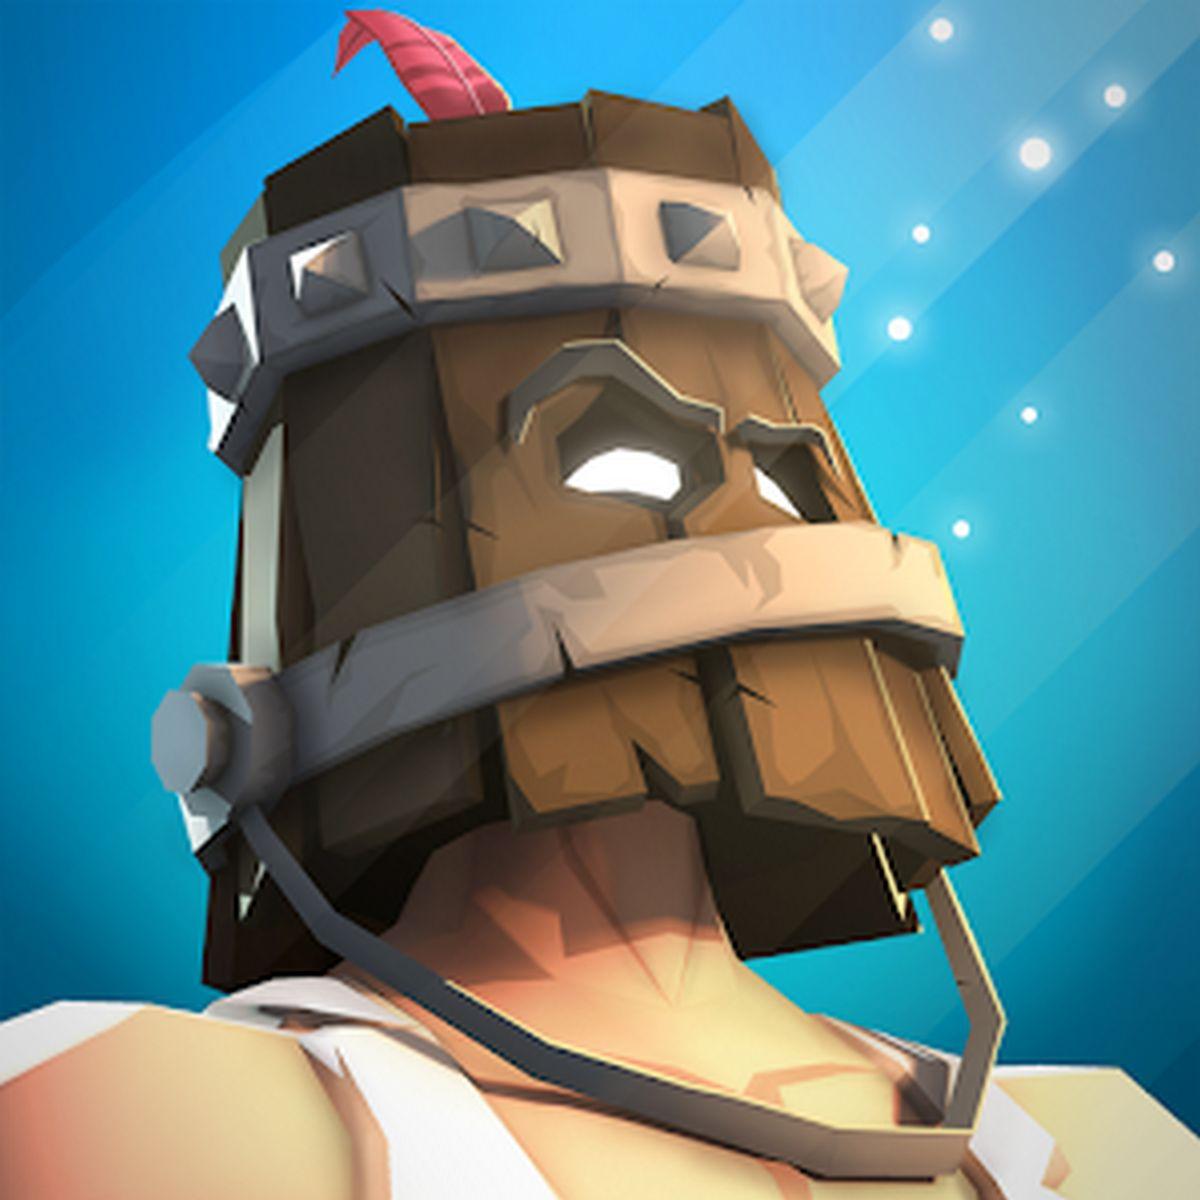 The Mighty Quest for Epic Loot APK MOD v6.2.1 (No Skill CD)